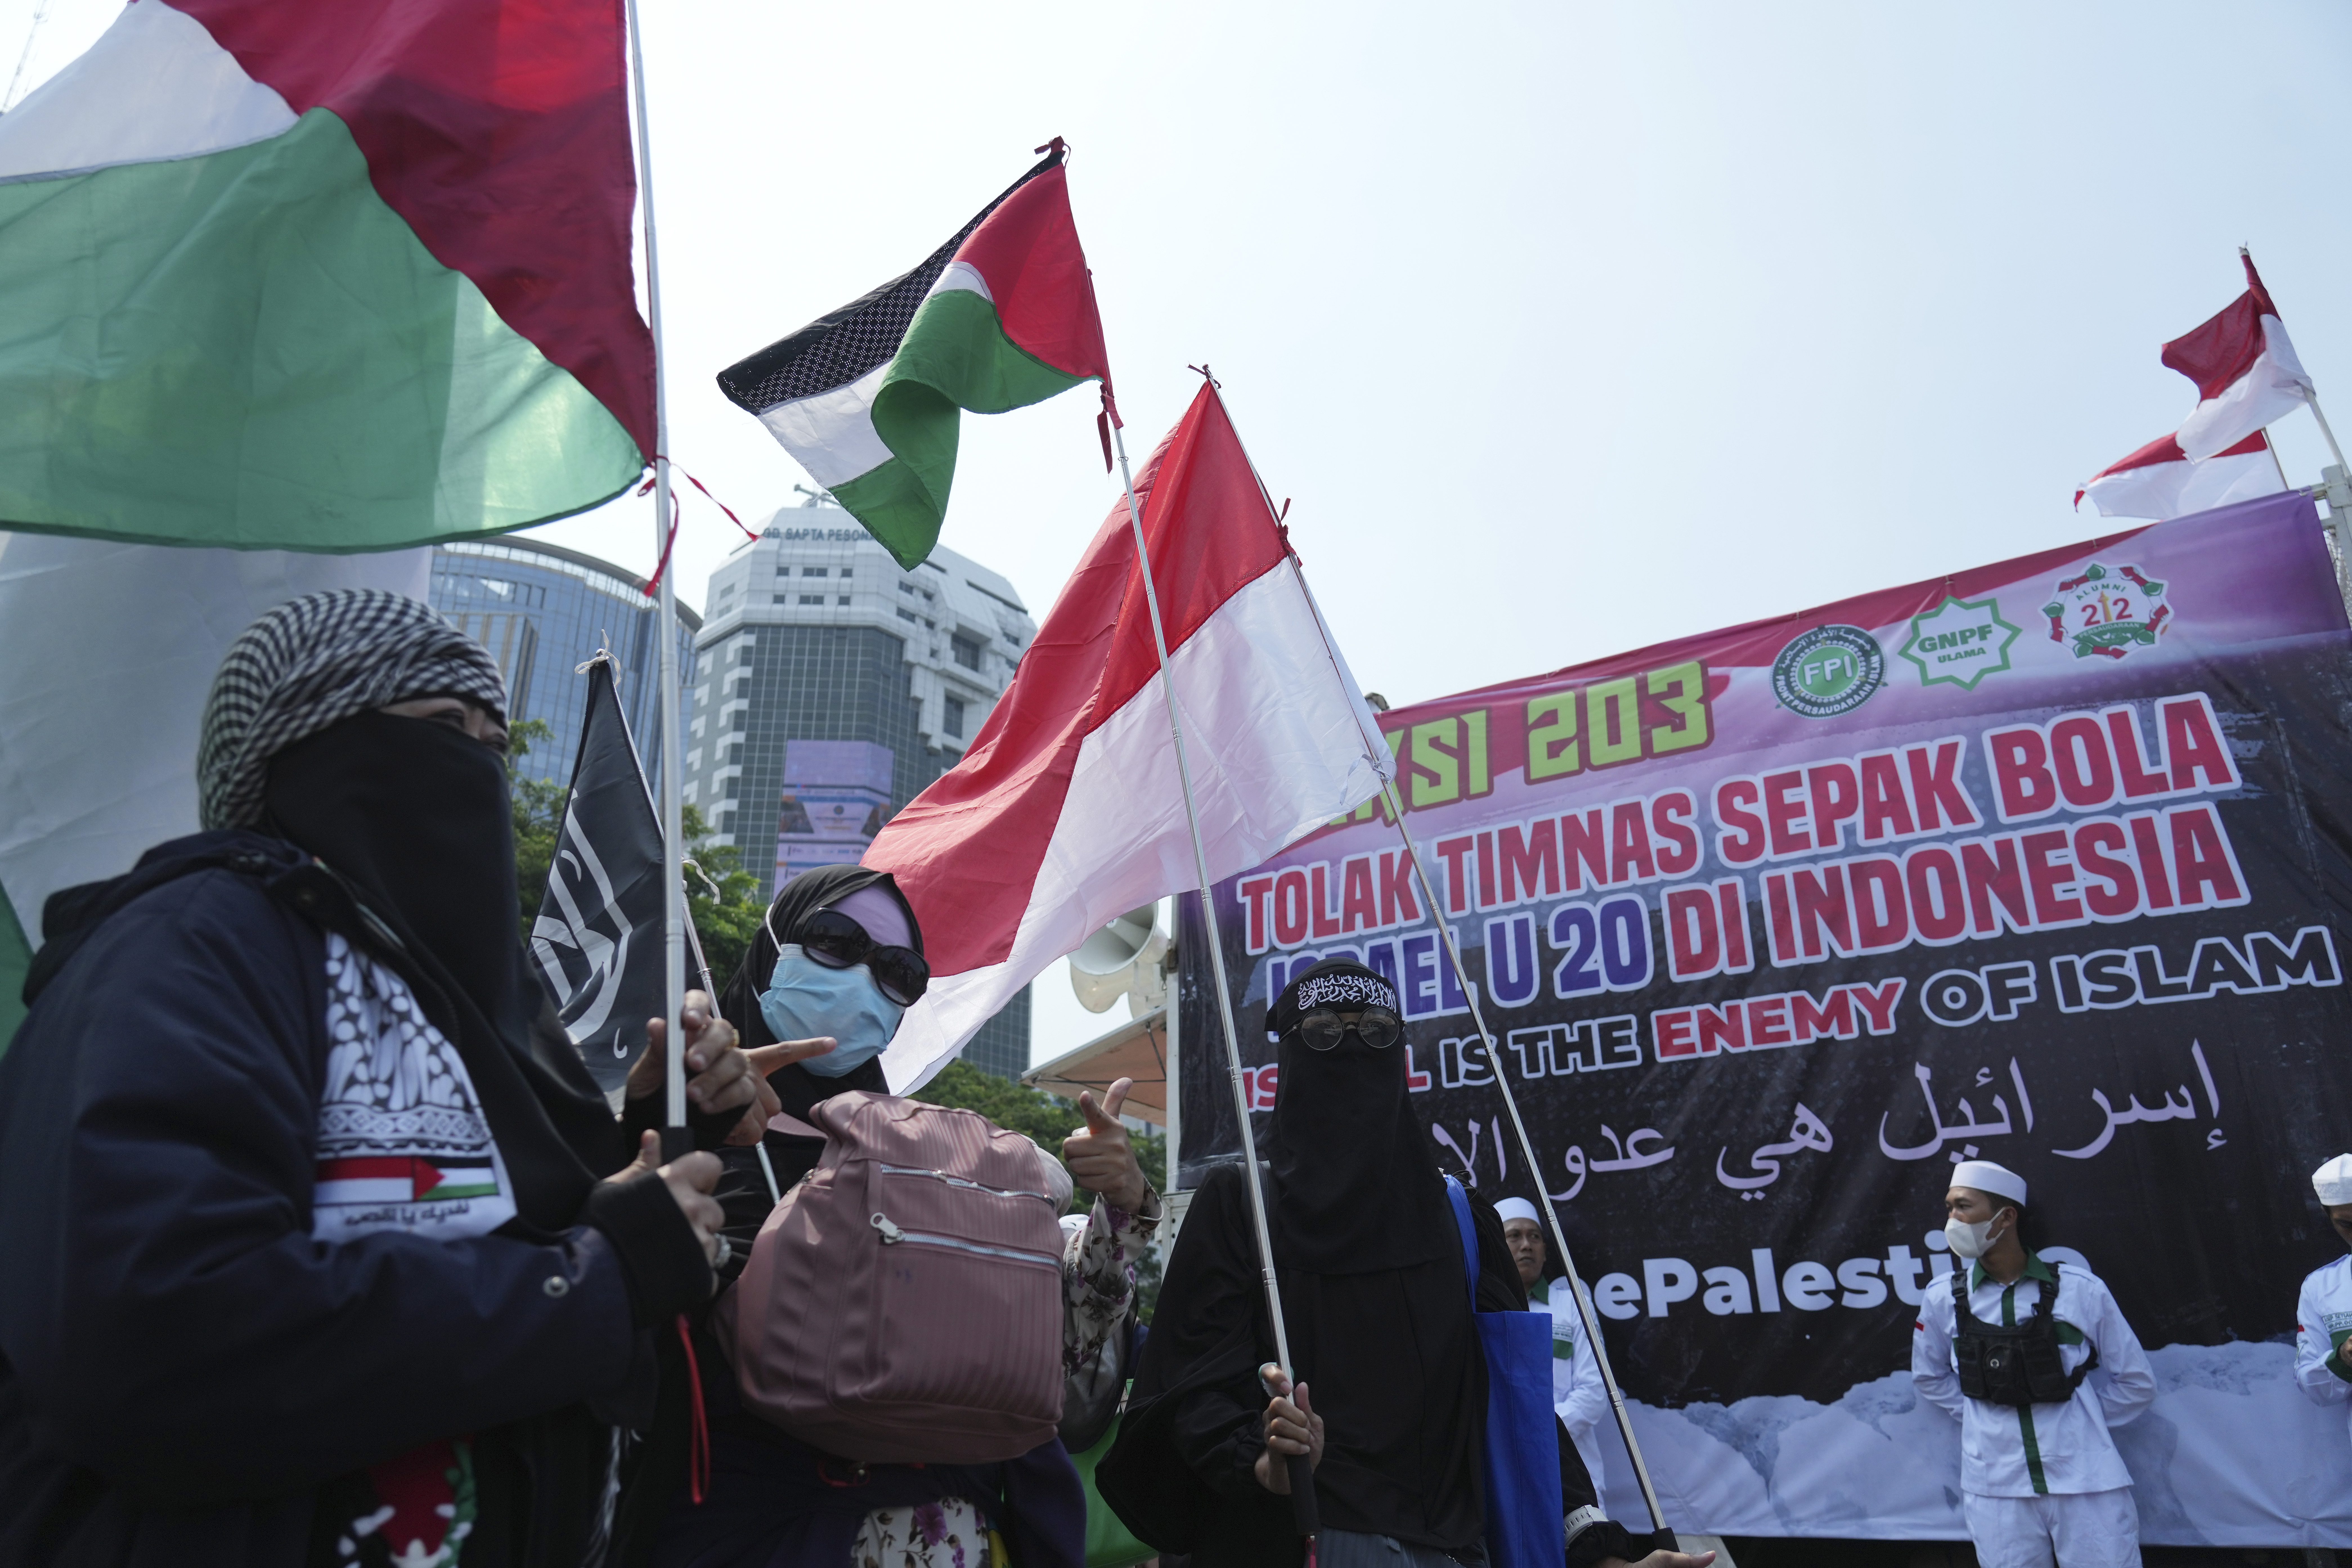 In this Monday, March 20, 2023 photo, protesters with the Palestinian flag march in Jakarta, Indonesia.  On Sunday, March 26, 2023, FIFA postpones the draw for the U-20 World Cup because Indonesia opposes the participation of Israel, a country with which it does not have diplomatic relations. (AP Photo/Achmad Ibrahim)